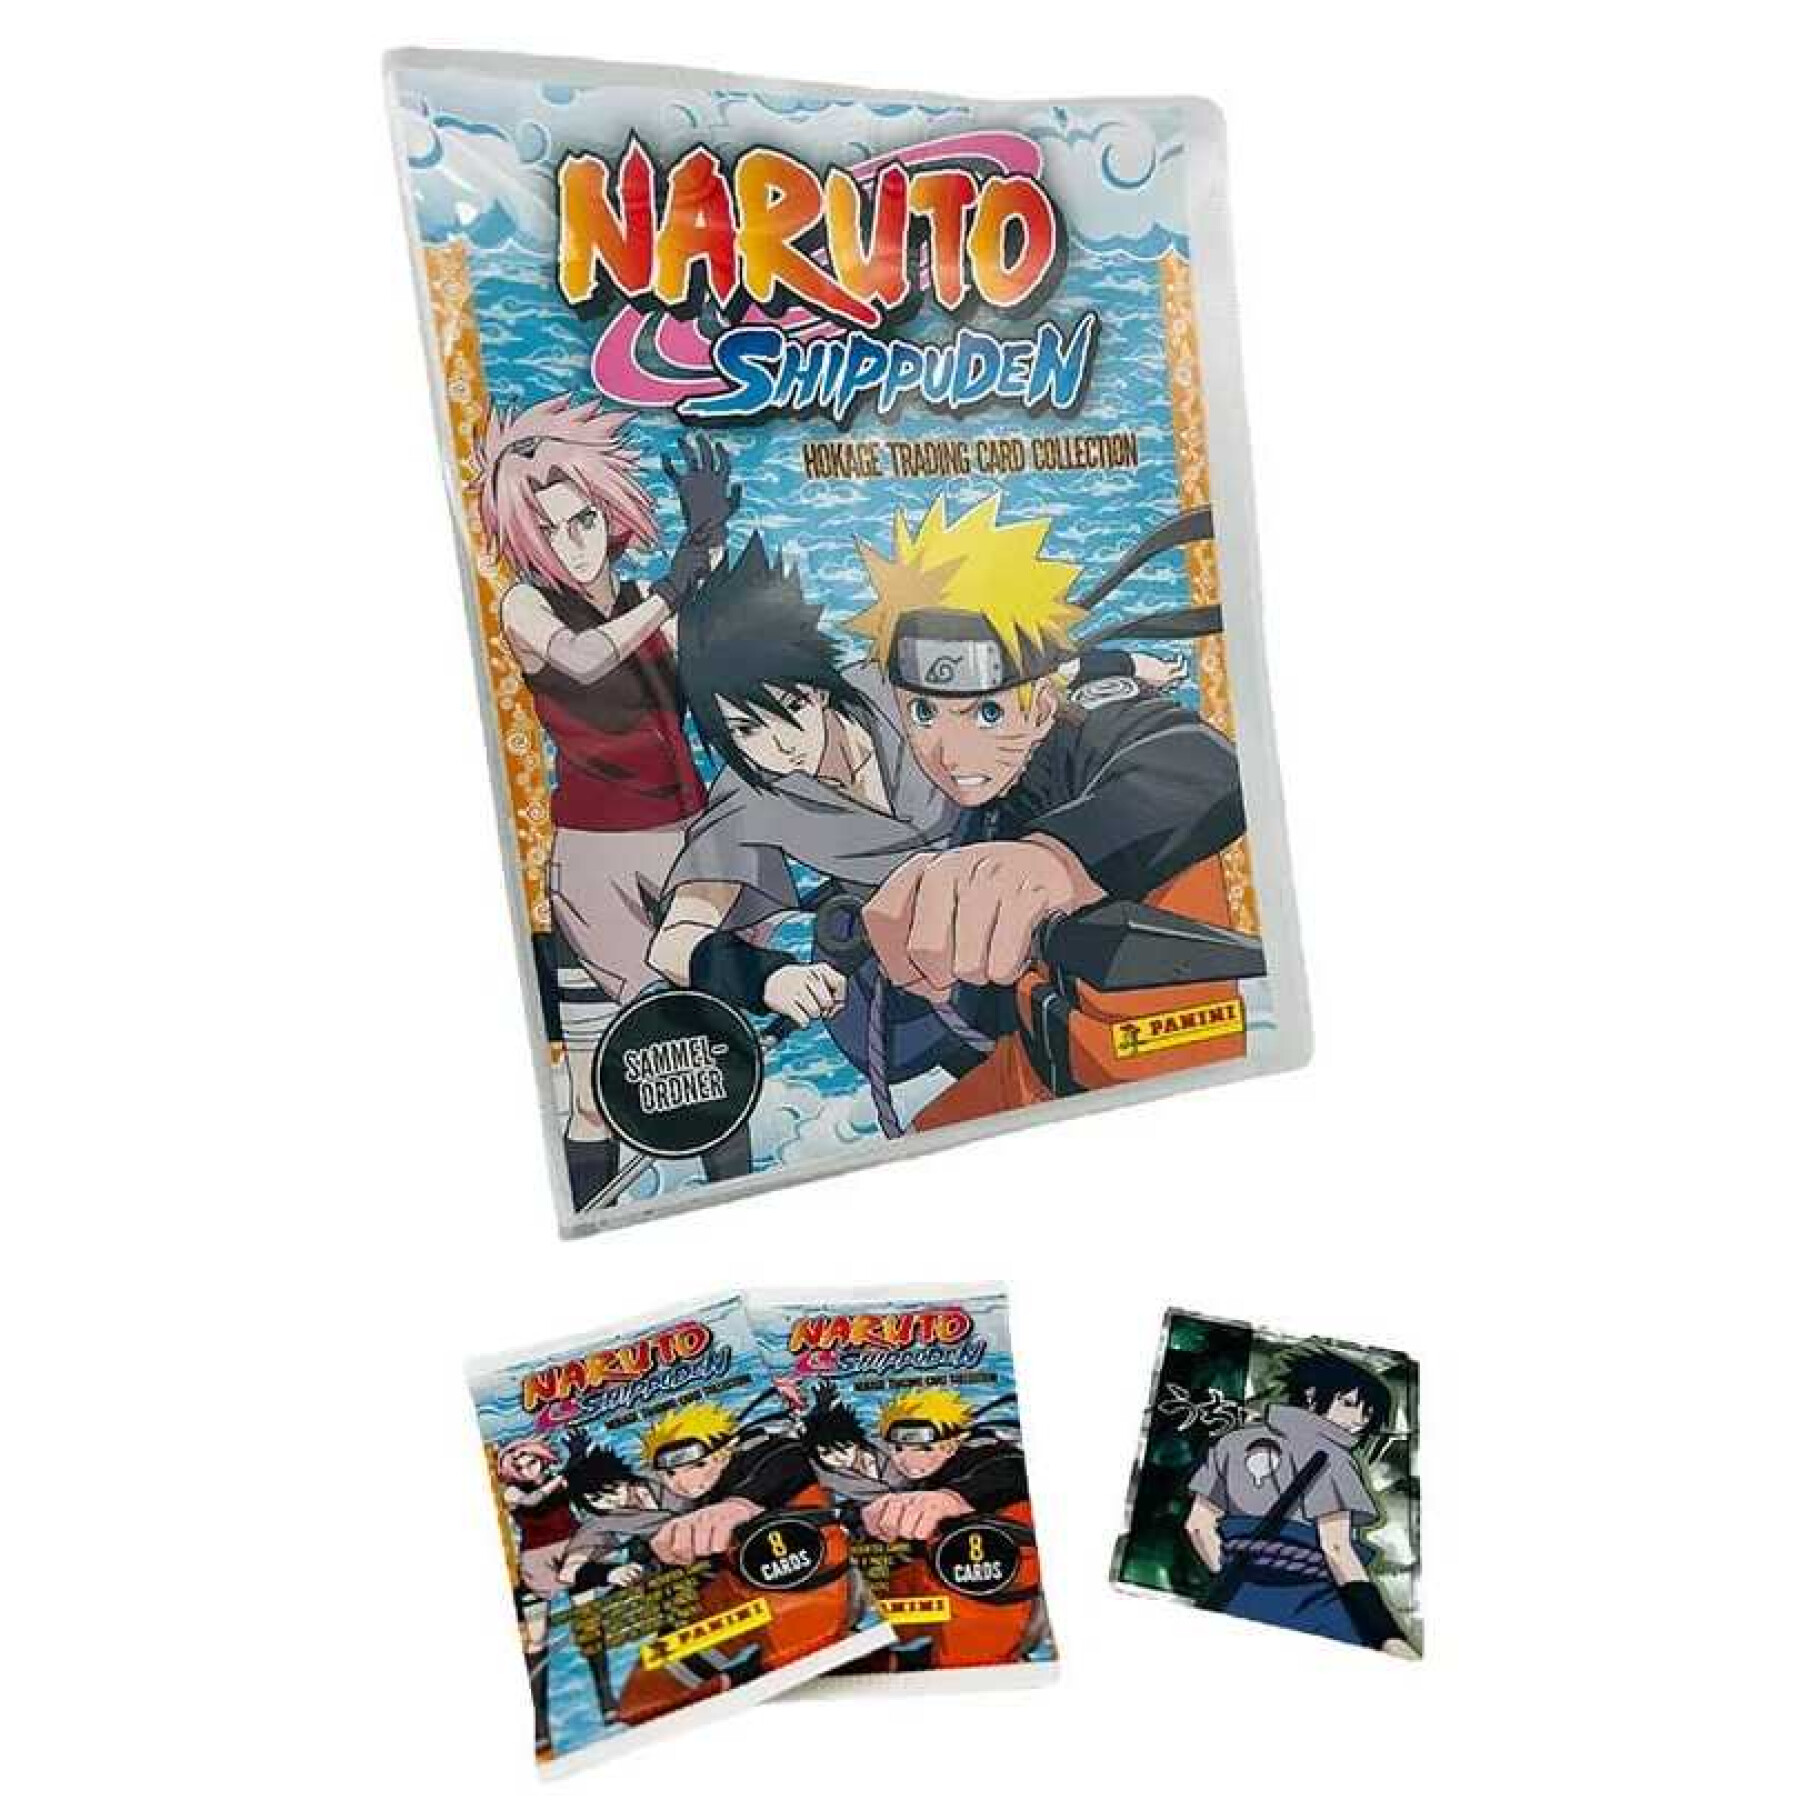 Carte à collectionner Panini Naruto Shippuden Hokage Trading Card Collection Starter Pack